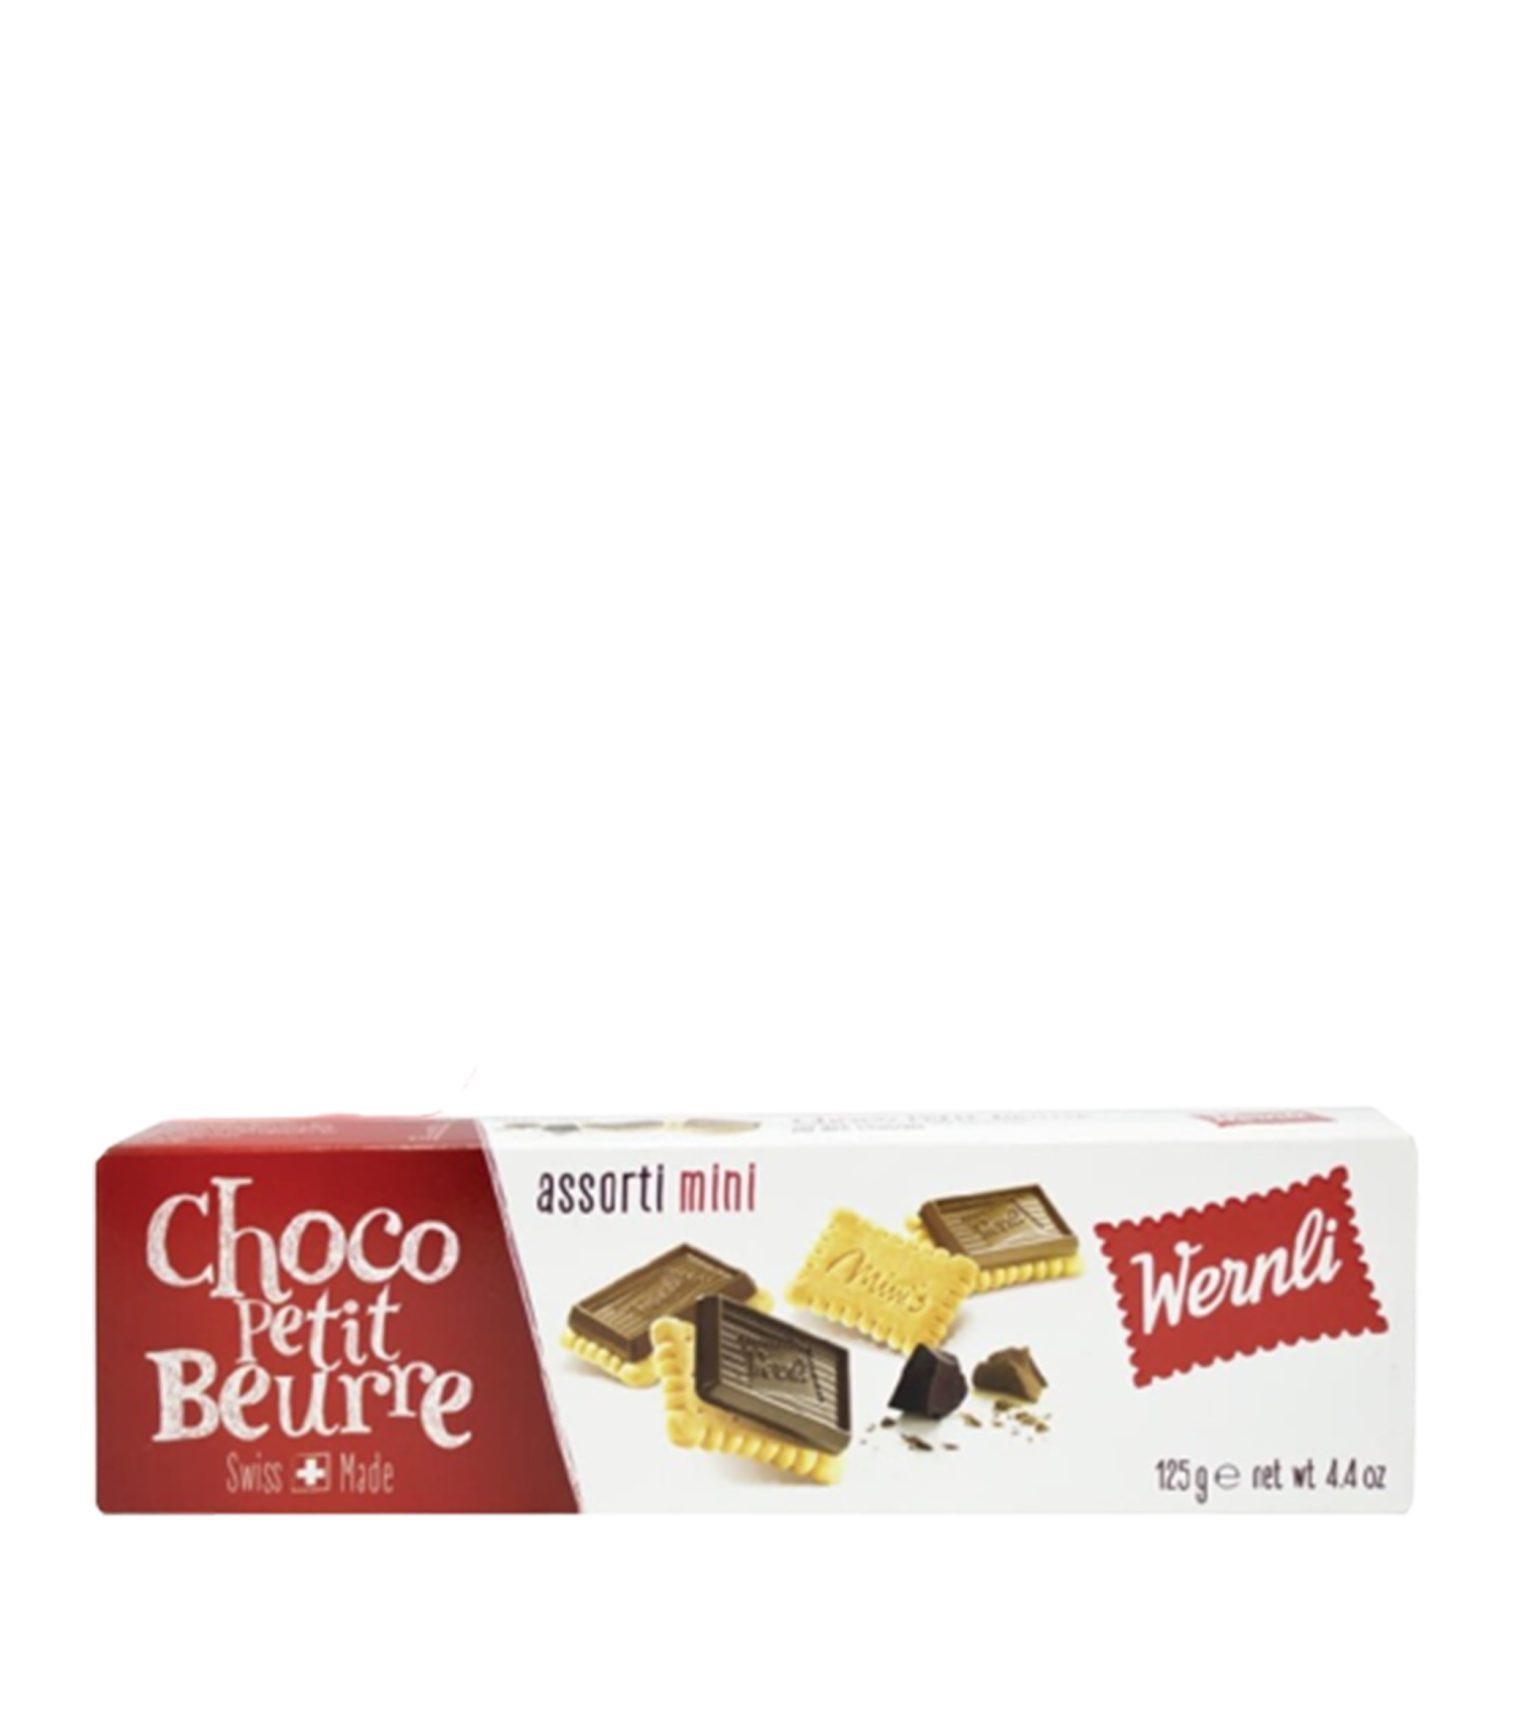 Wernli Biscuits Choco Petit Beurre 125g-image